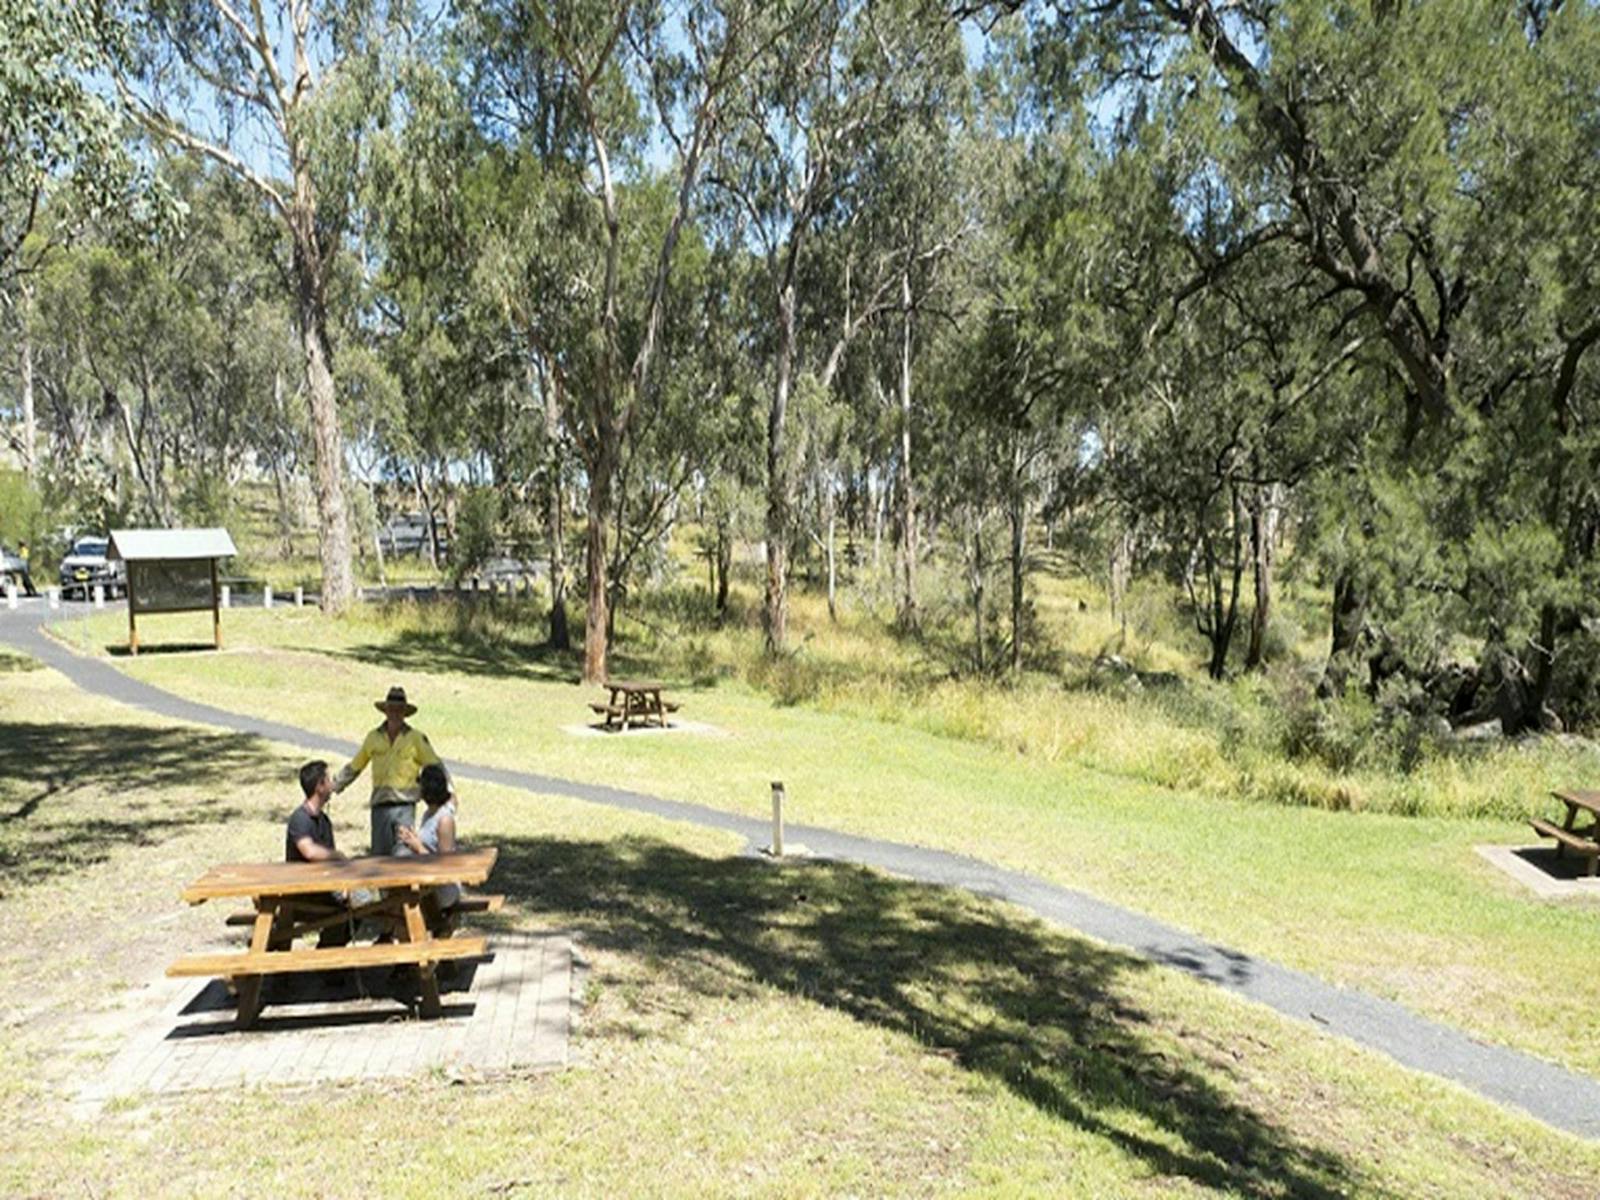 Picnickers chat with an NPWS staff member at Threlfall picnic area. Photo: Leah Pippos ©DPIE